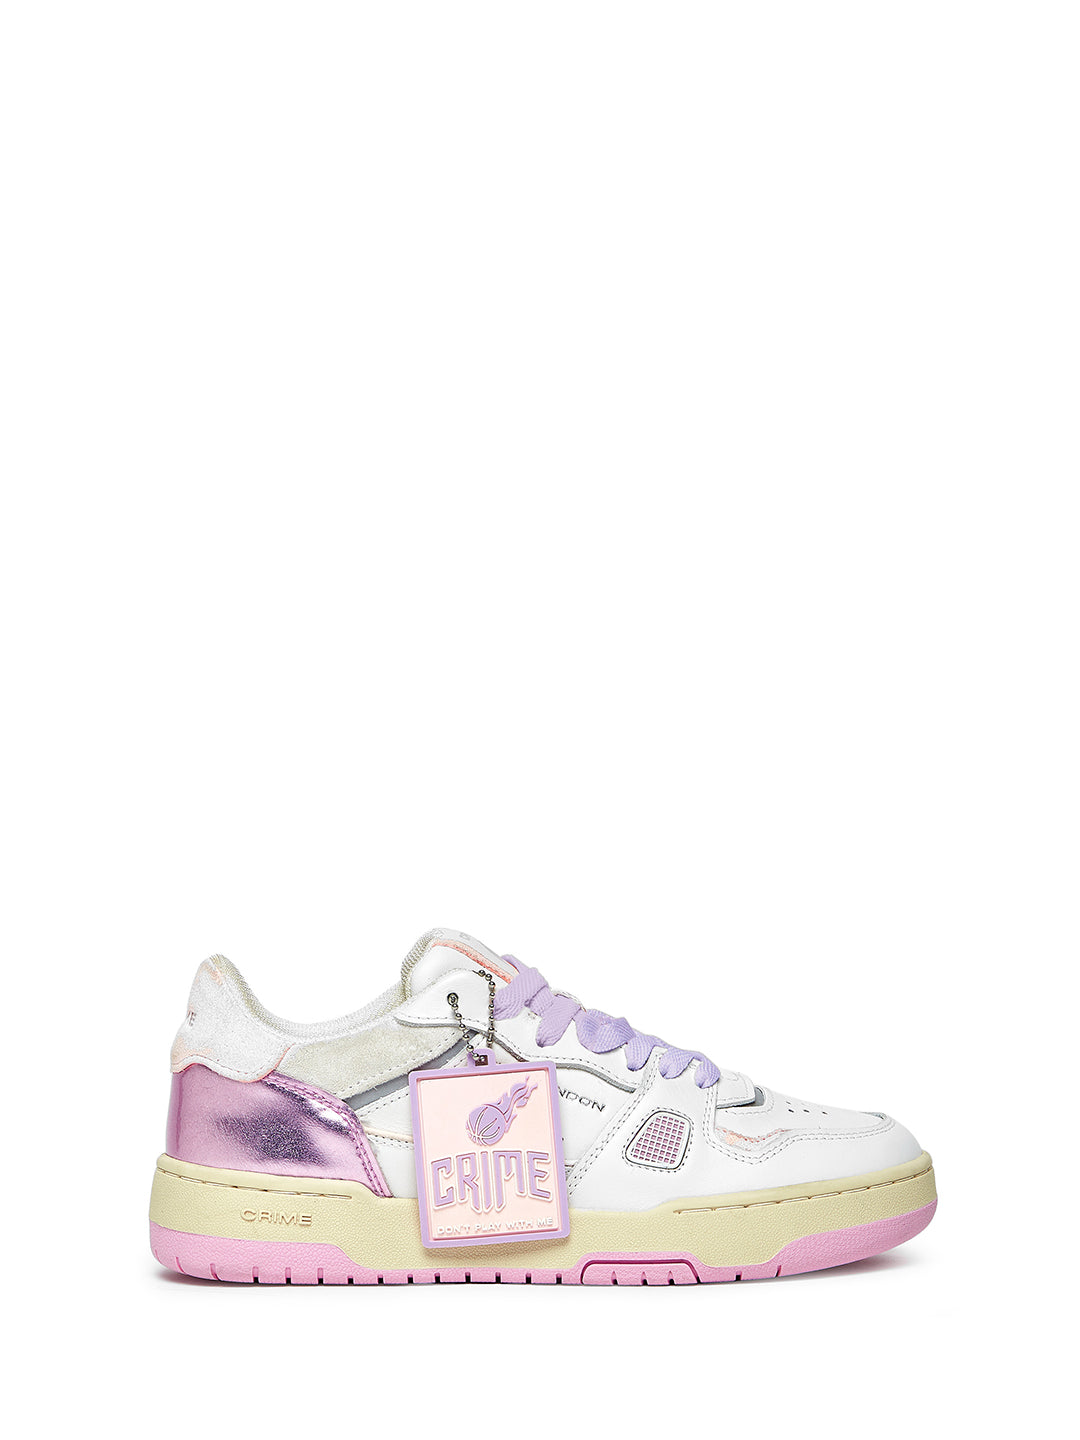 Crime Off Court OG Pink Me Up sneakers bianco con tab lilla